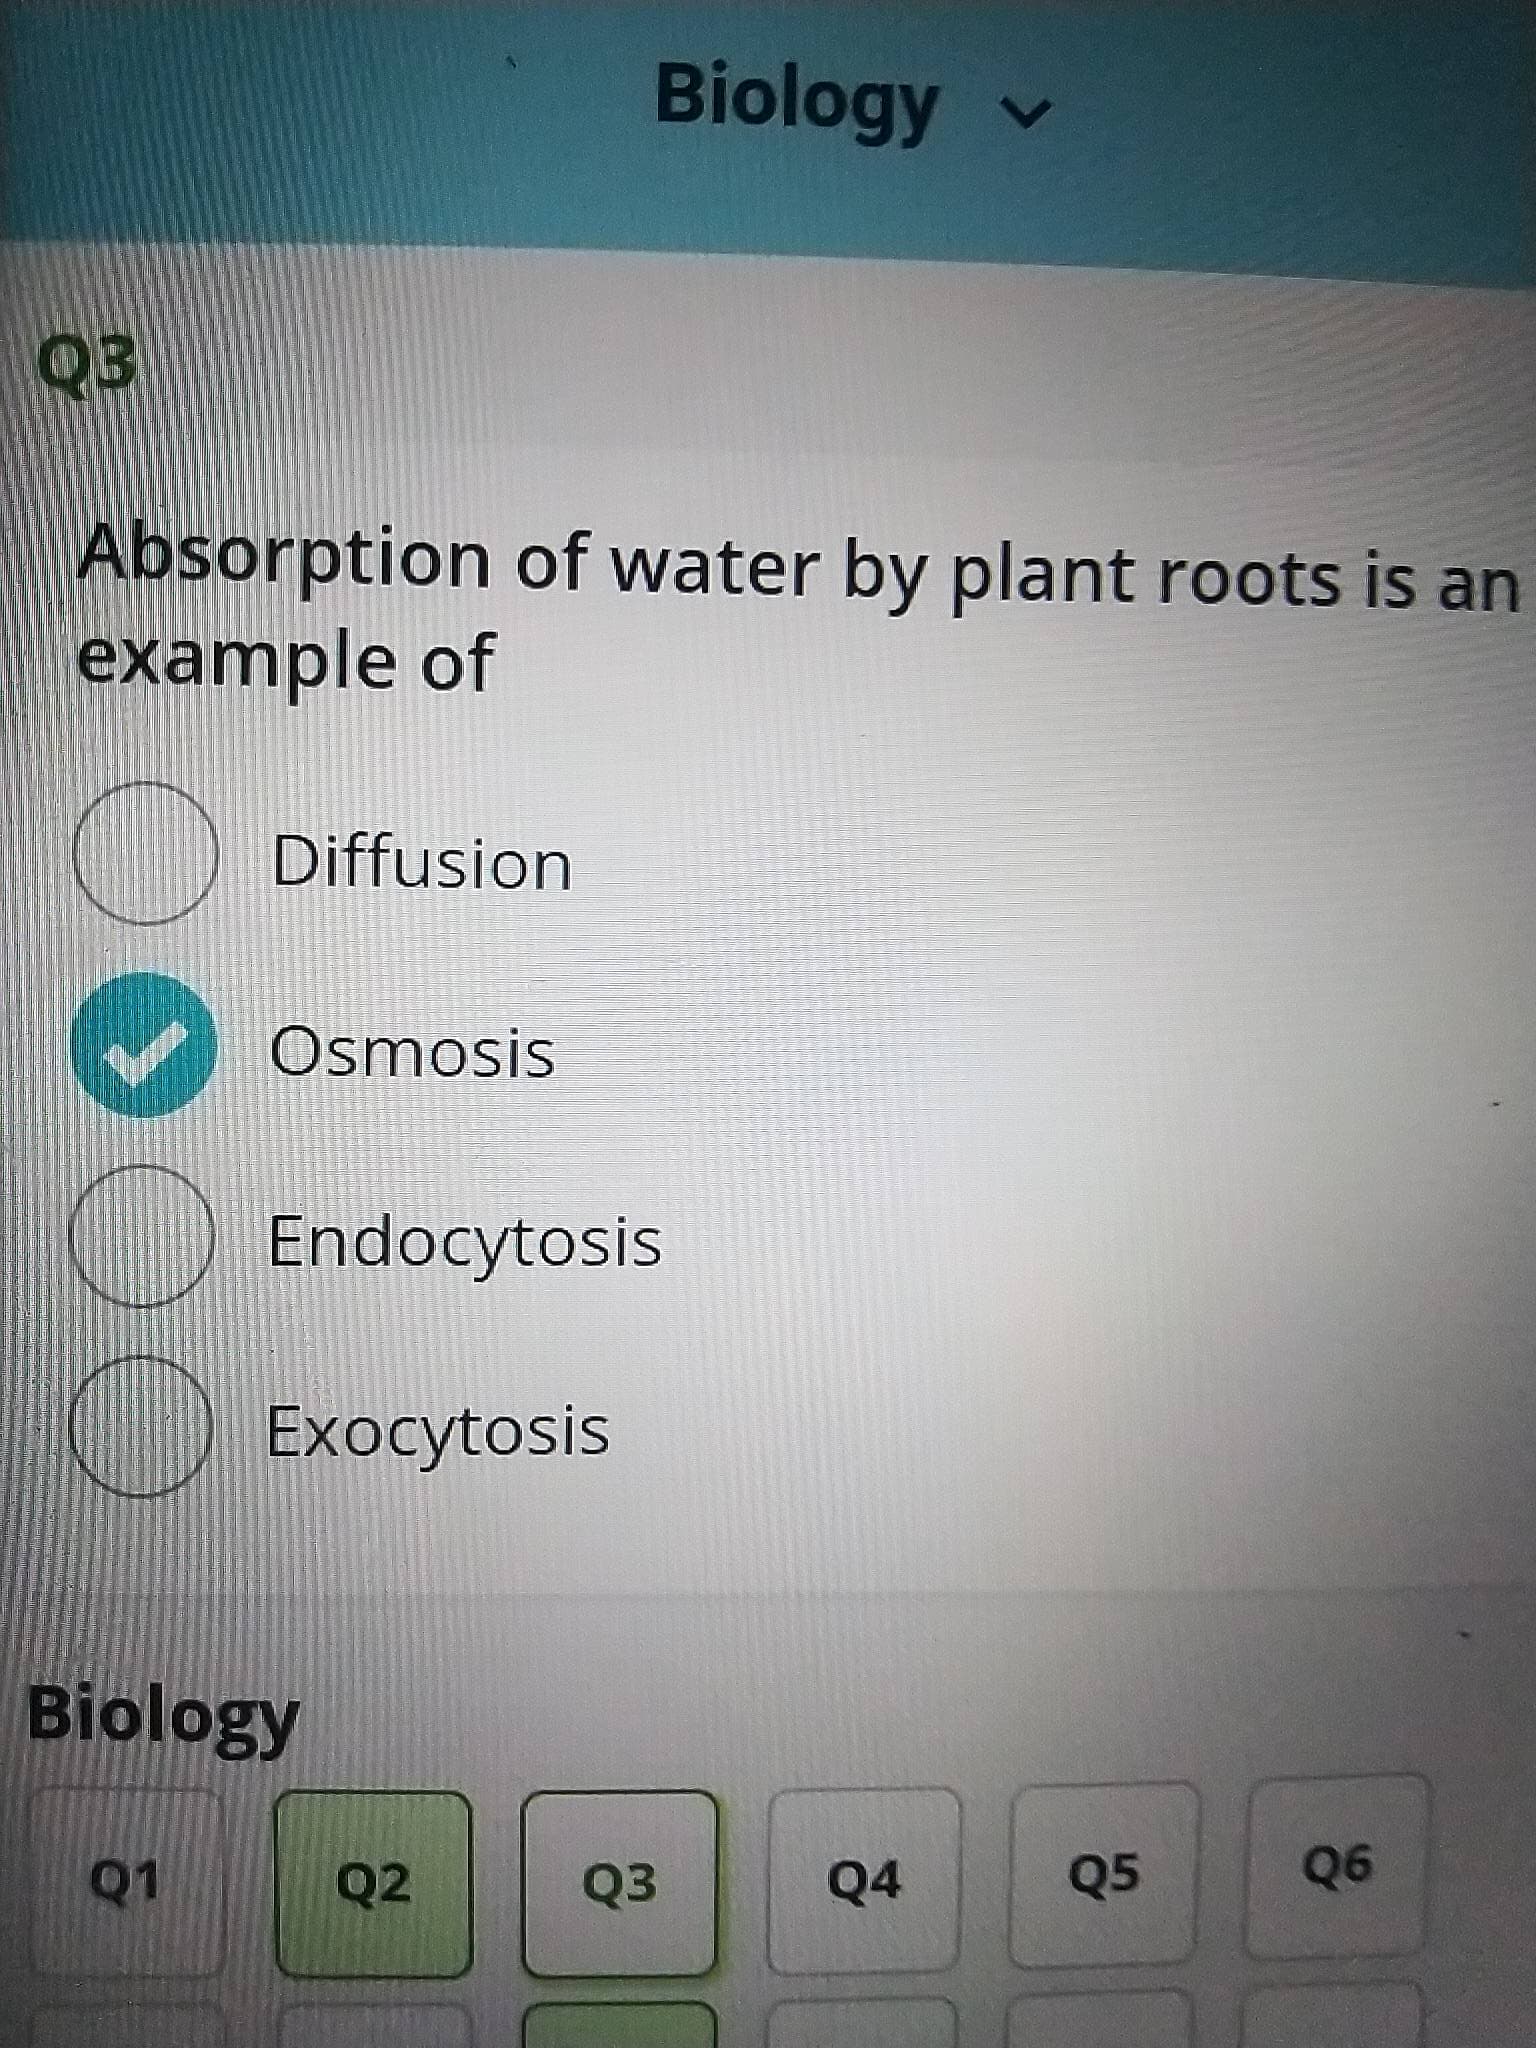 Biology v
Absorption of water by plant roots is an
example of
Diffusion
Osmosis
Endocytosis
Exocytosis
Biology
Q2
Q3
Q4
Q5
90
